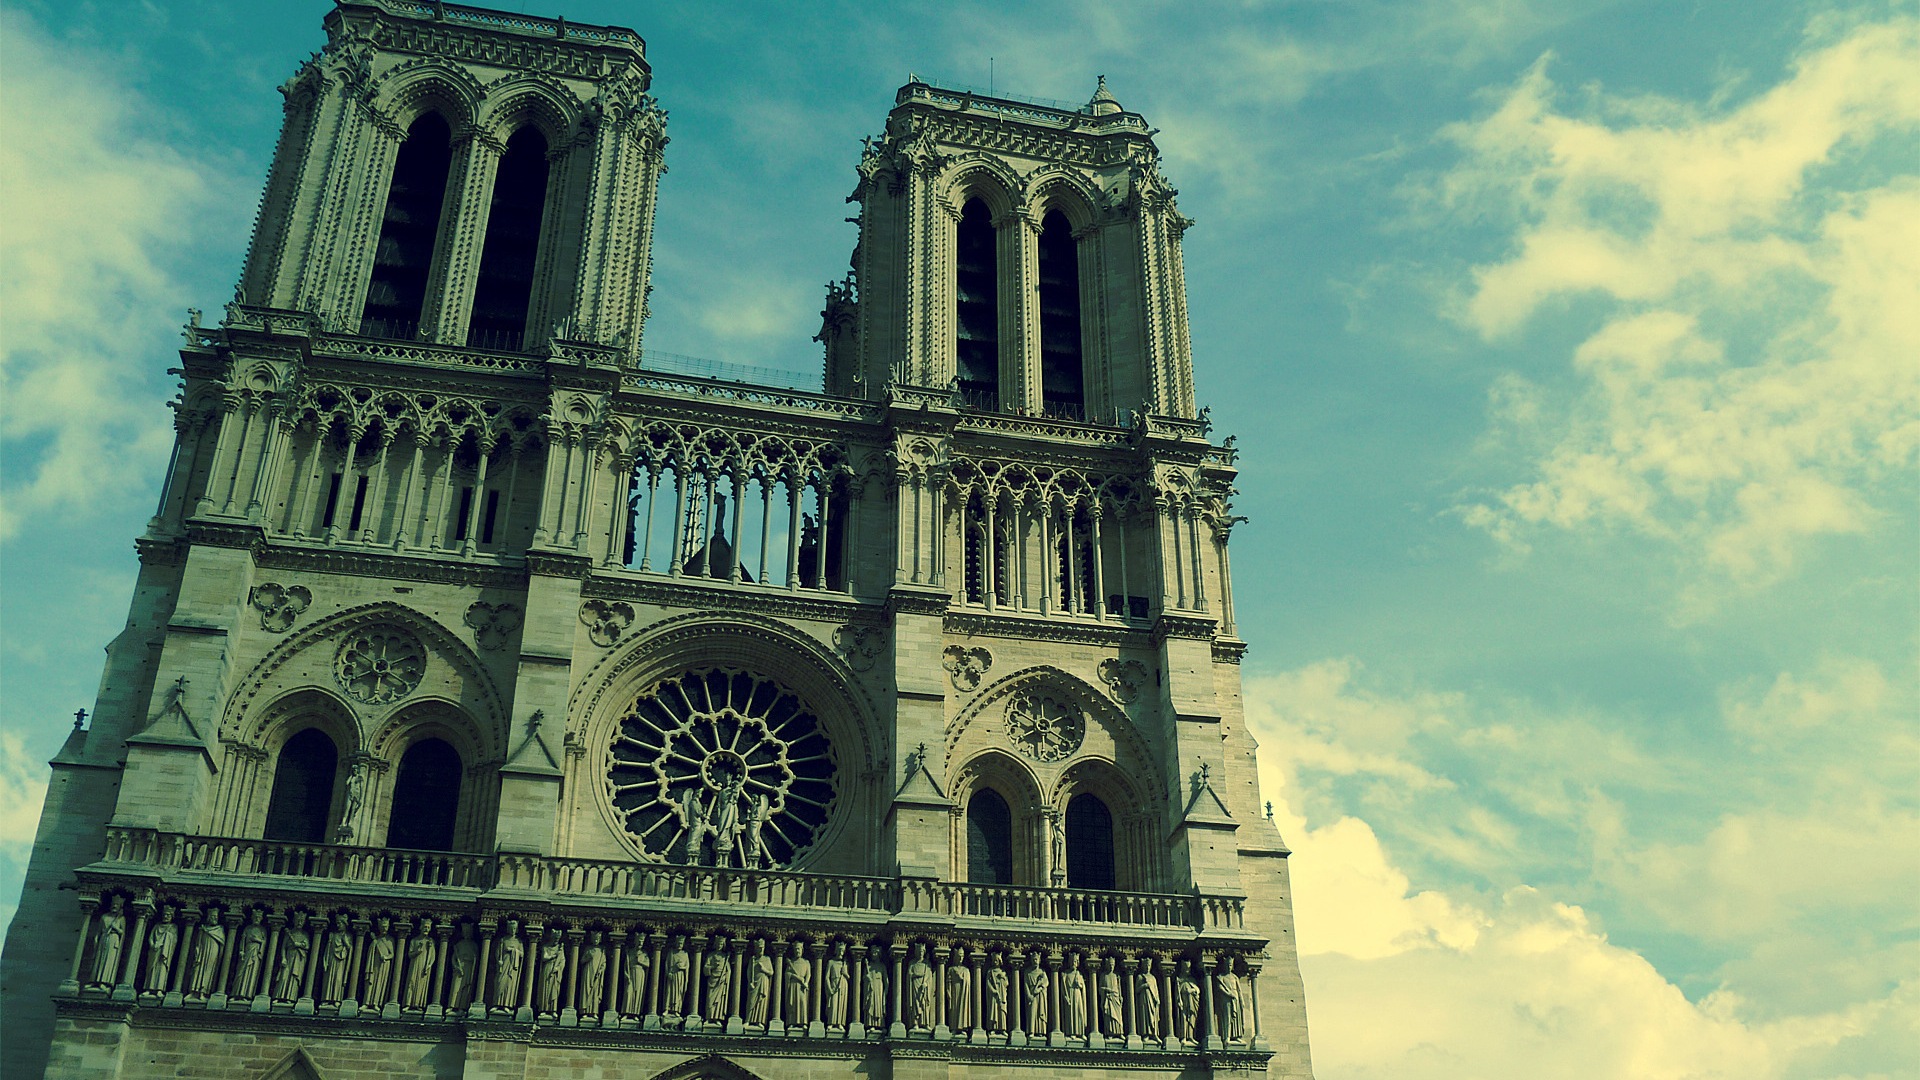 Notre Dame HD Wallpapers #2 - 1920x1080